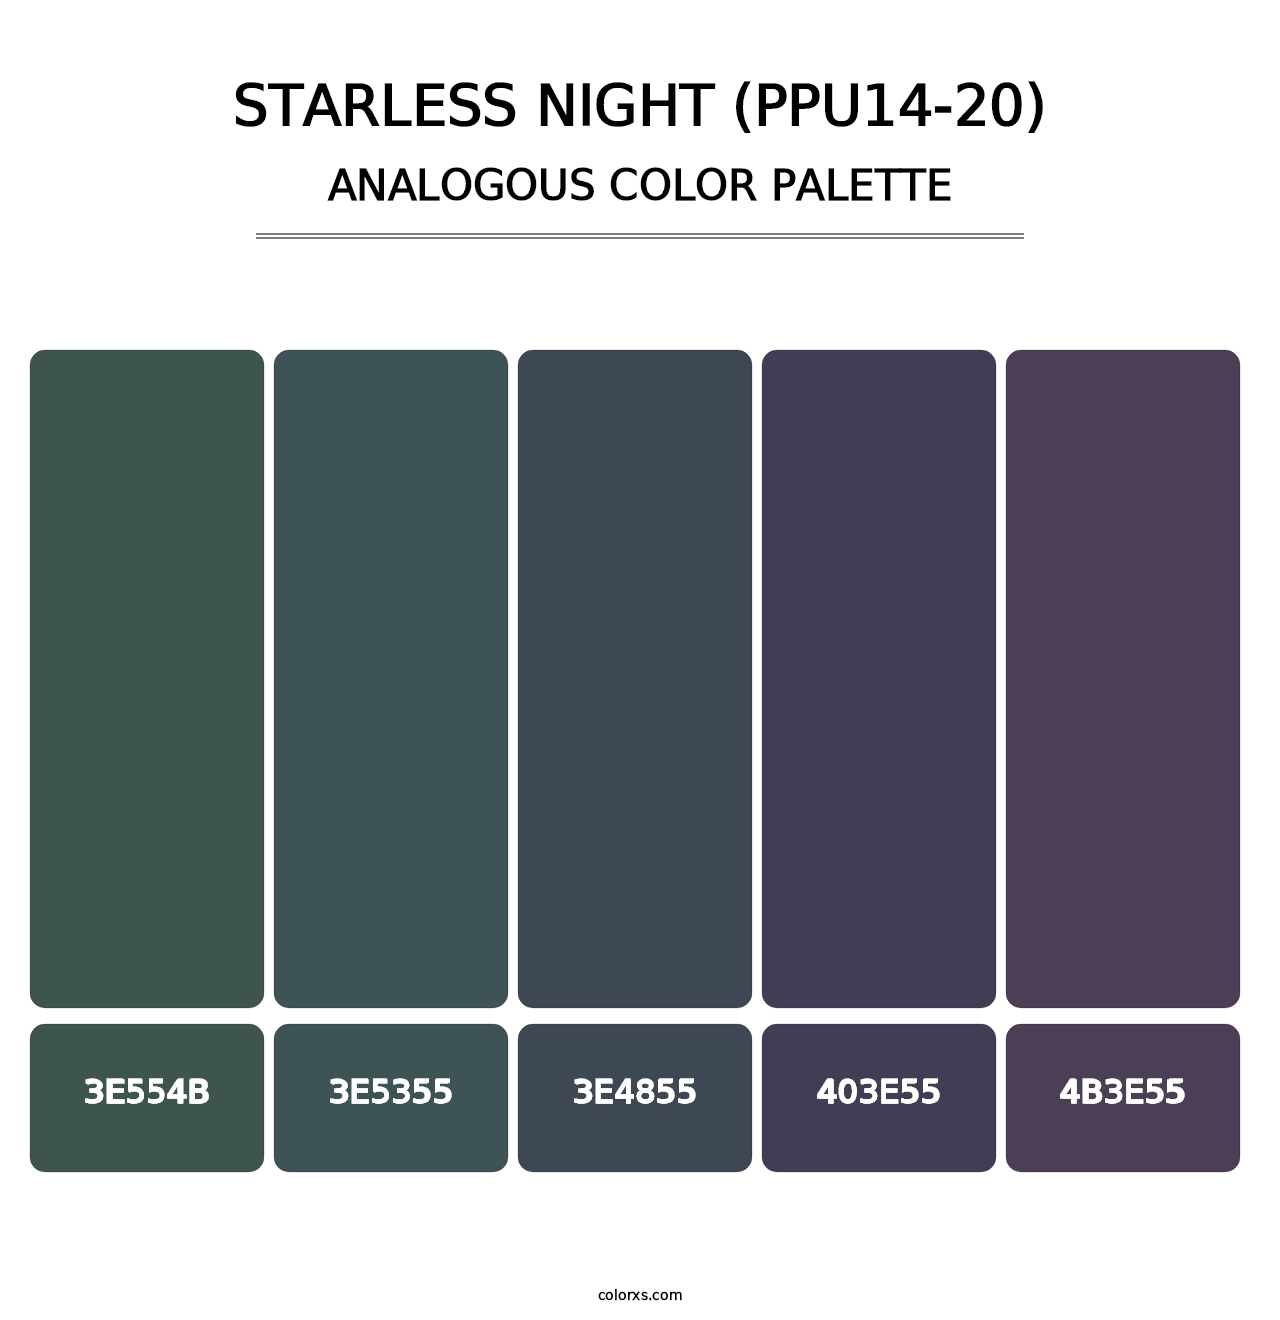 Starless Night (PPU14-20) - Analogous Color Palette